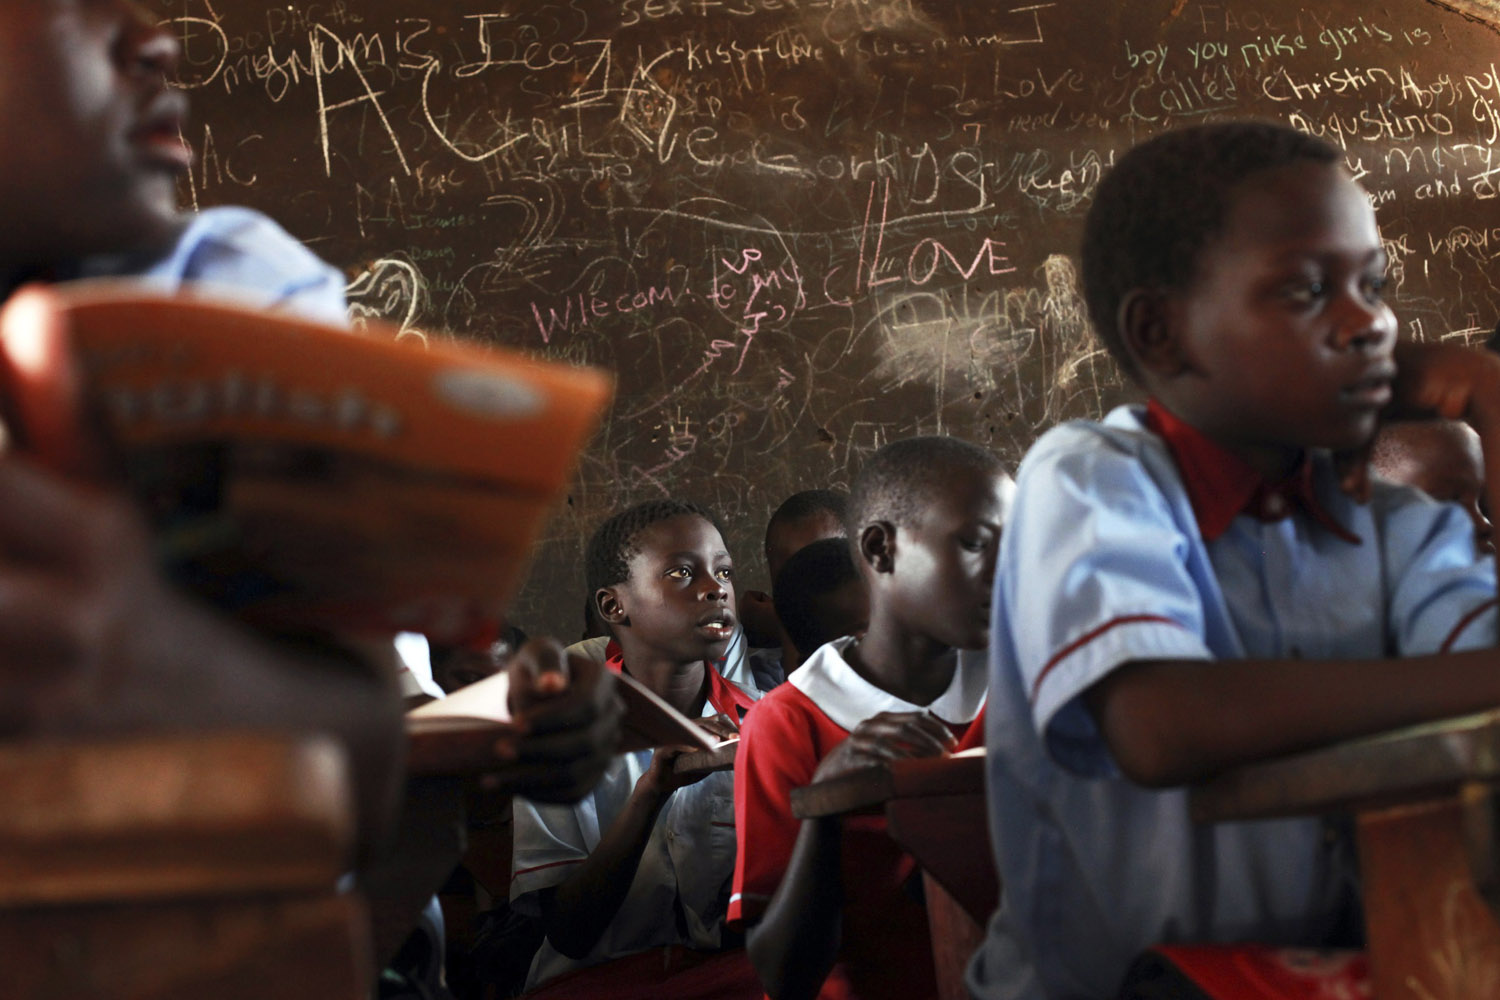 Students attend a lesson at a public school in Gudele, on the outskirts of South Sudan's capital Juba